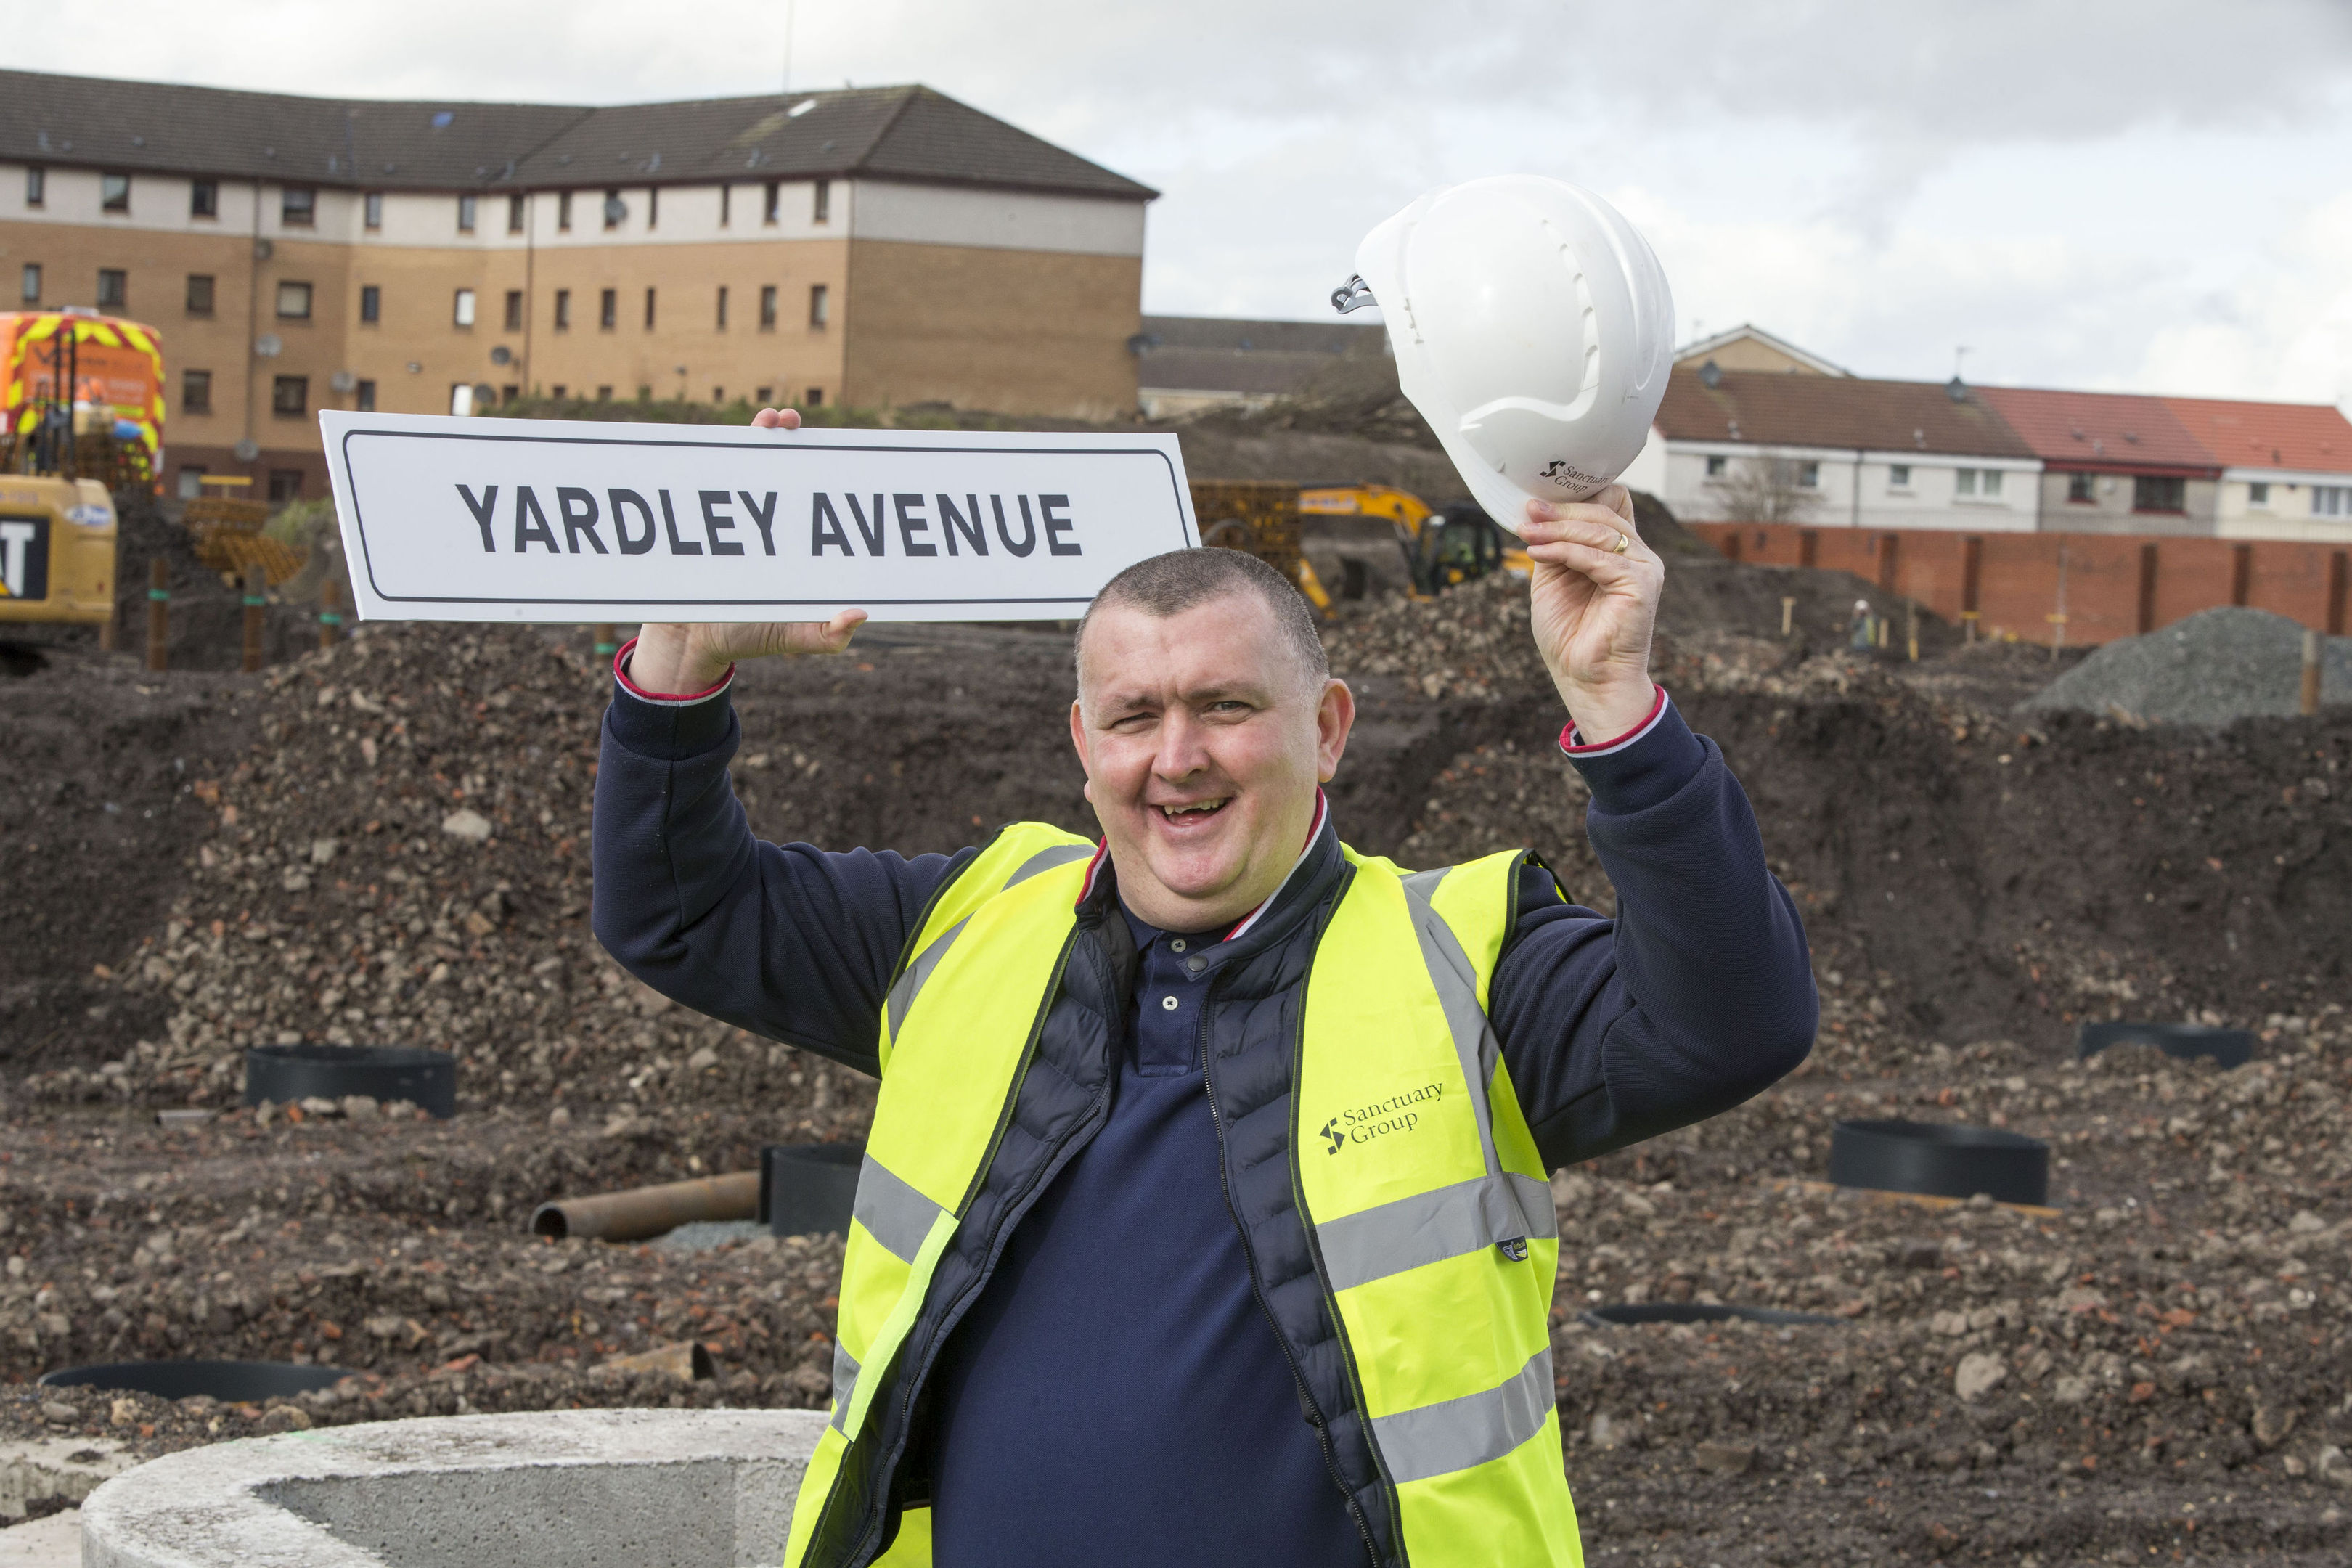 Mark Yardley holding a sign for a street which has been named in his honour (Jeff Holmes/PA Wire)